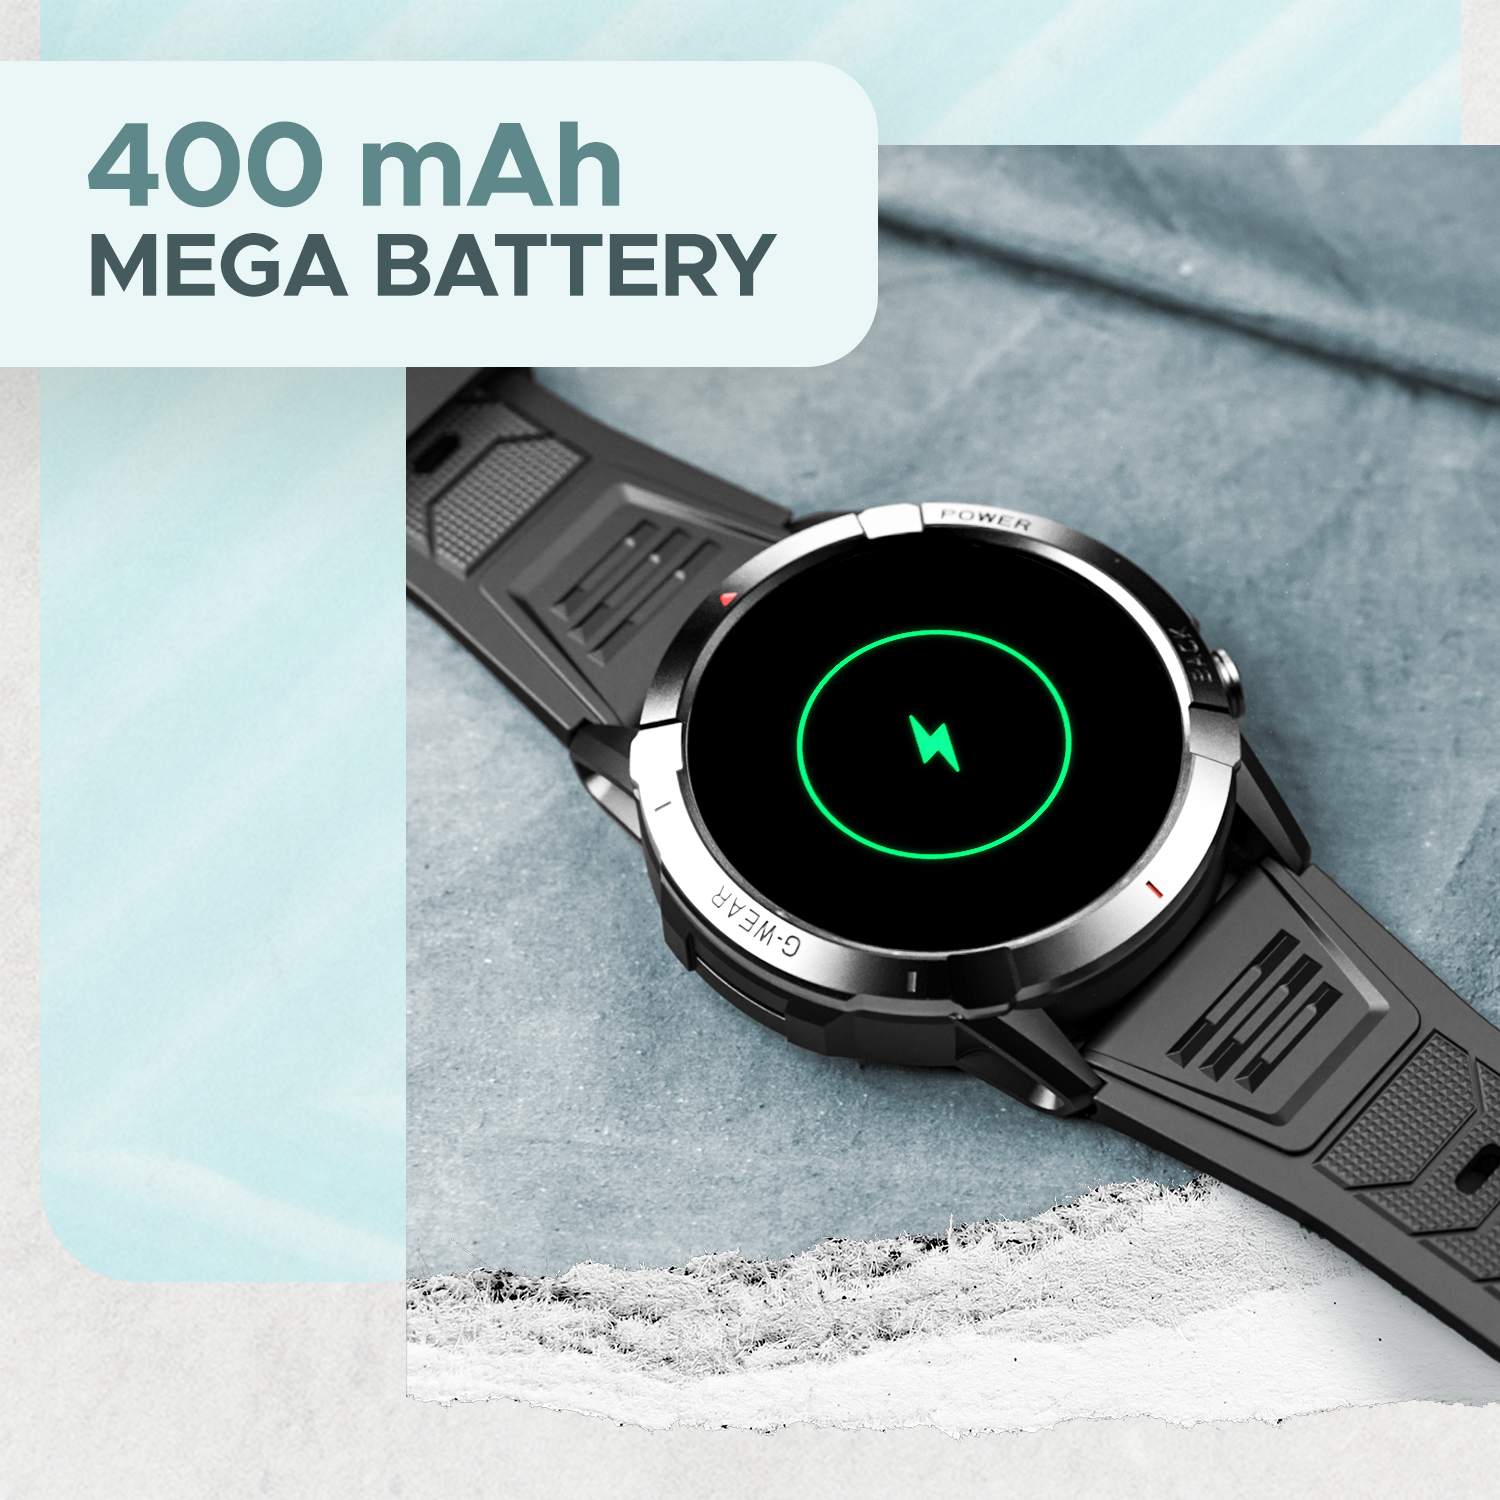 boAt Lunar Fit | BT Calling Smartwatch with 1.43" (3.63cm) AMOLED Display, HR, SpO2, & Stress Monitoring, Multiple Sports Mode